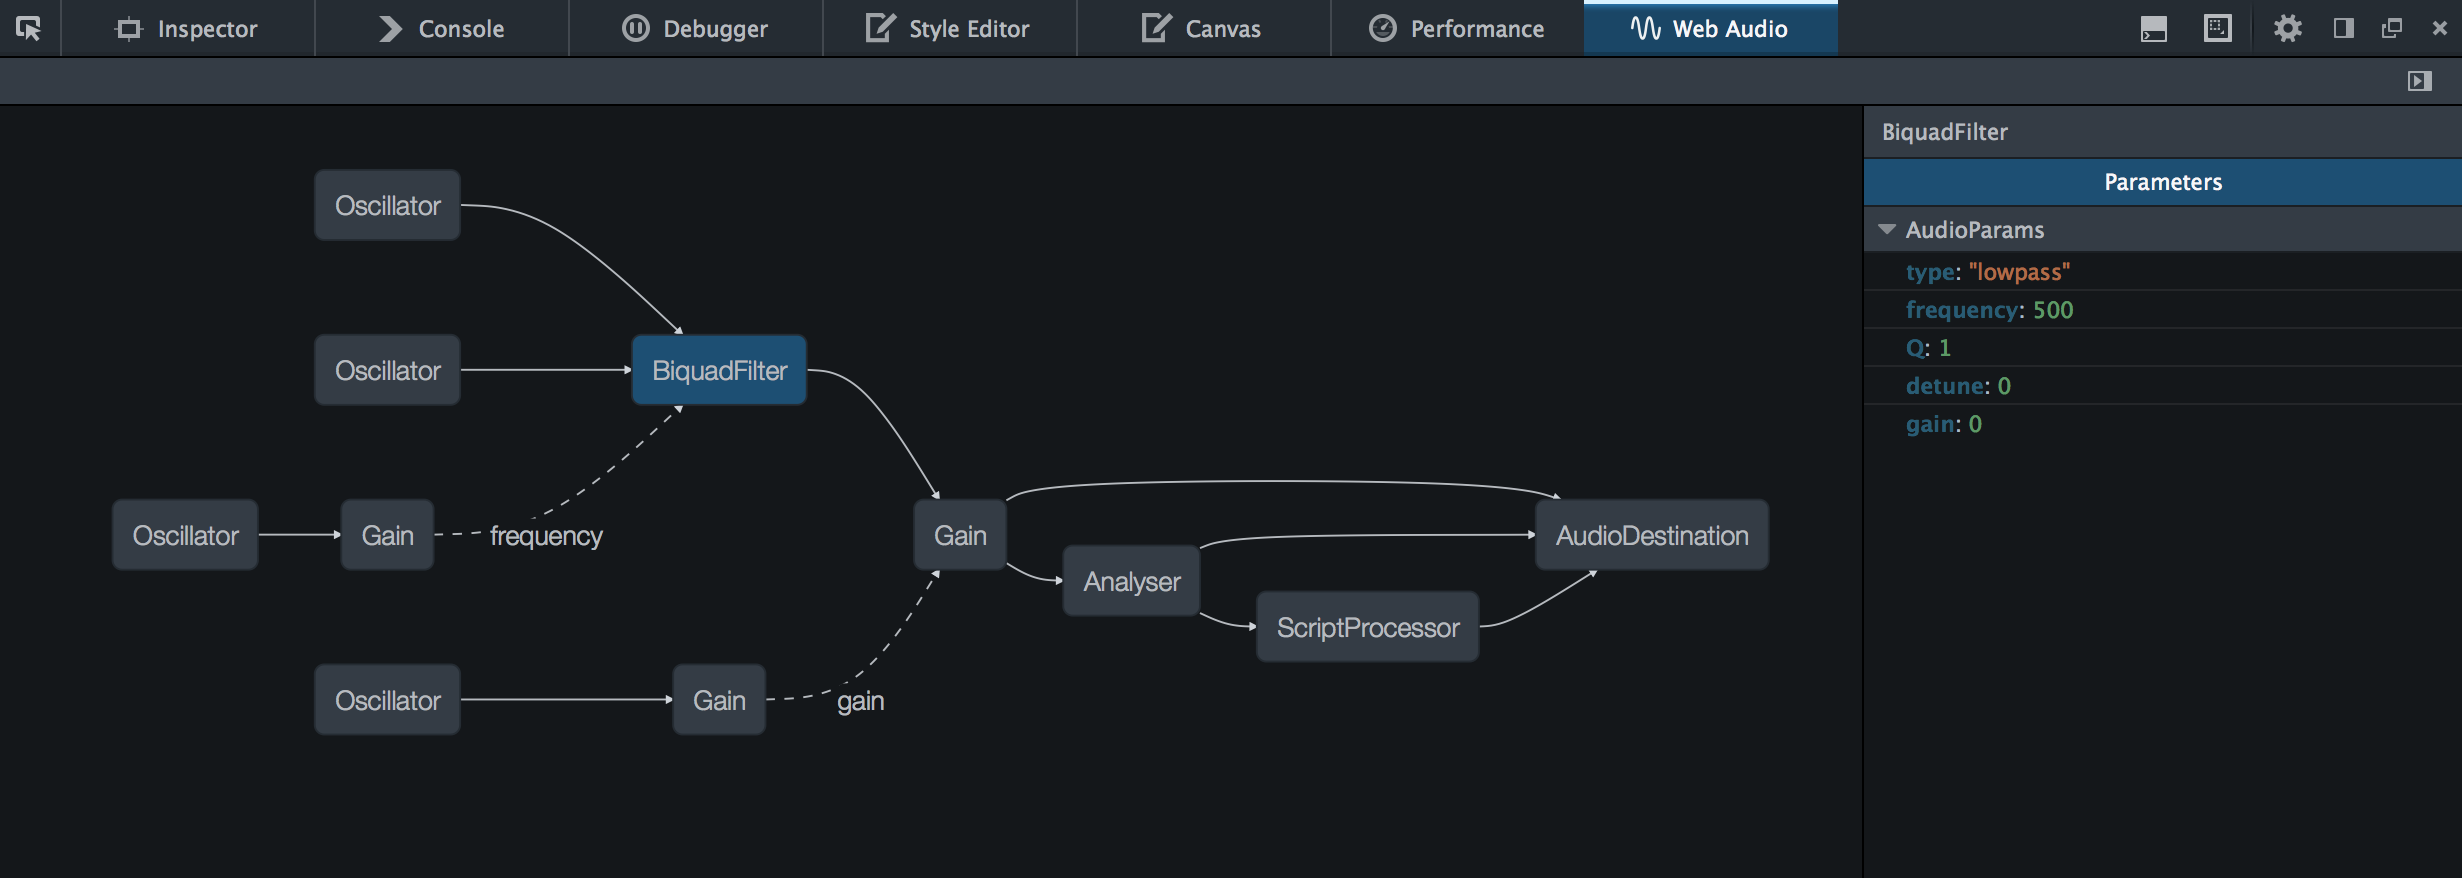 The Web Audio Editor displaying a graph of audio nodes, with a selected BiquadFilterNode and its editable parameters.